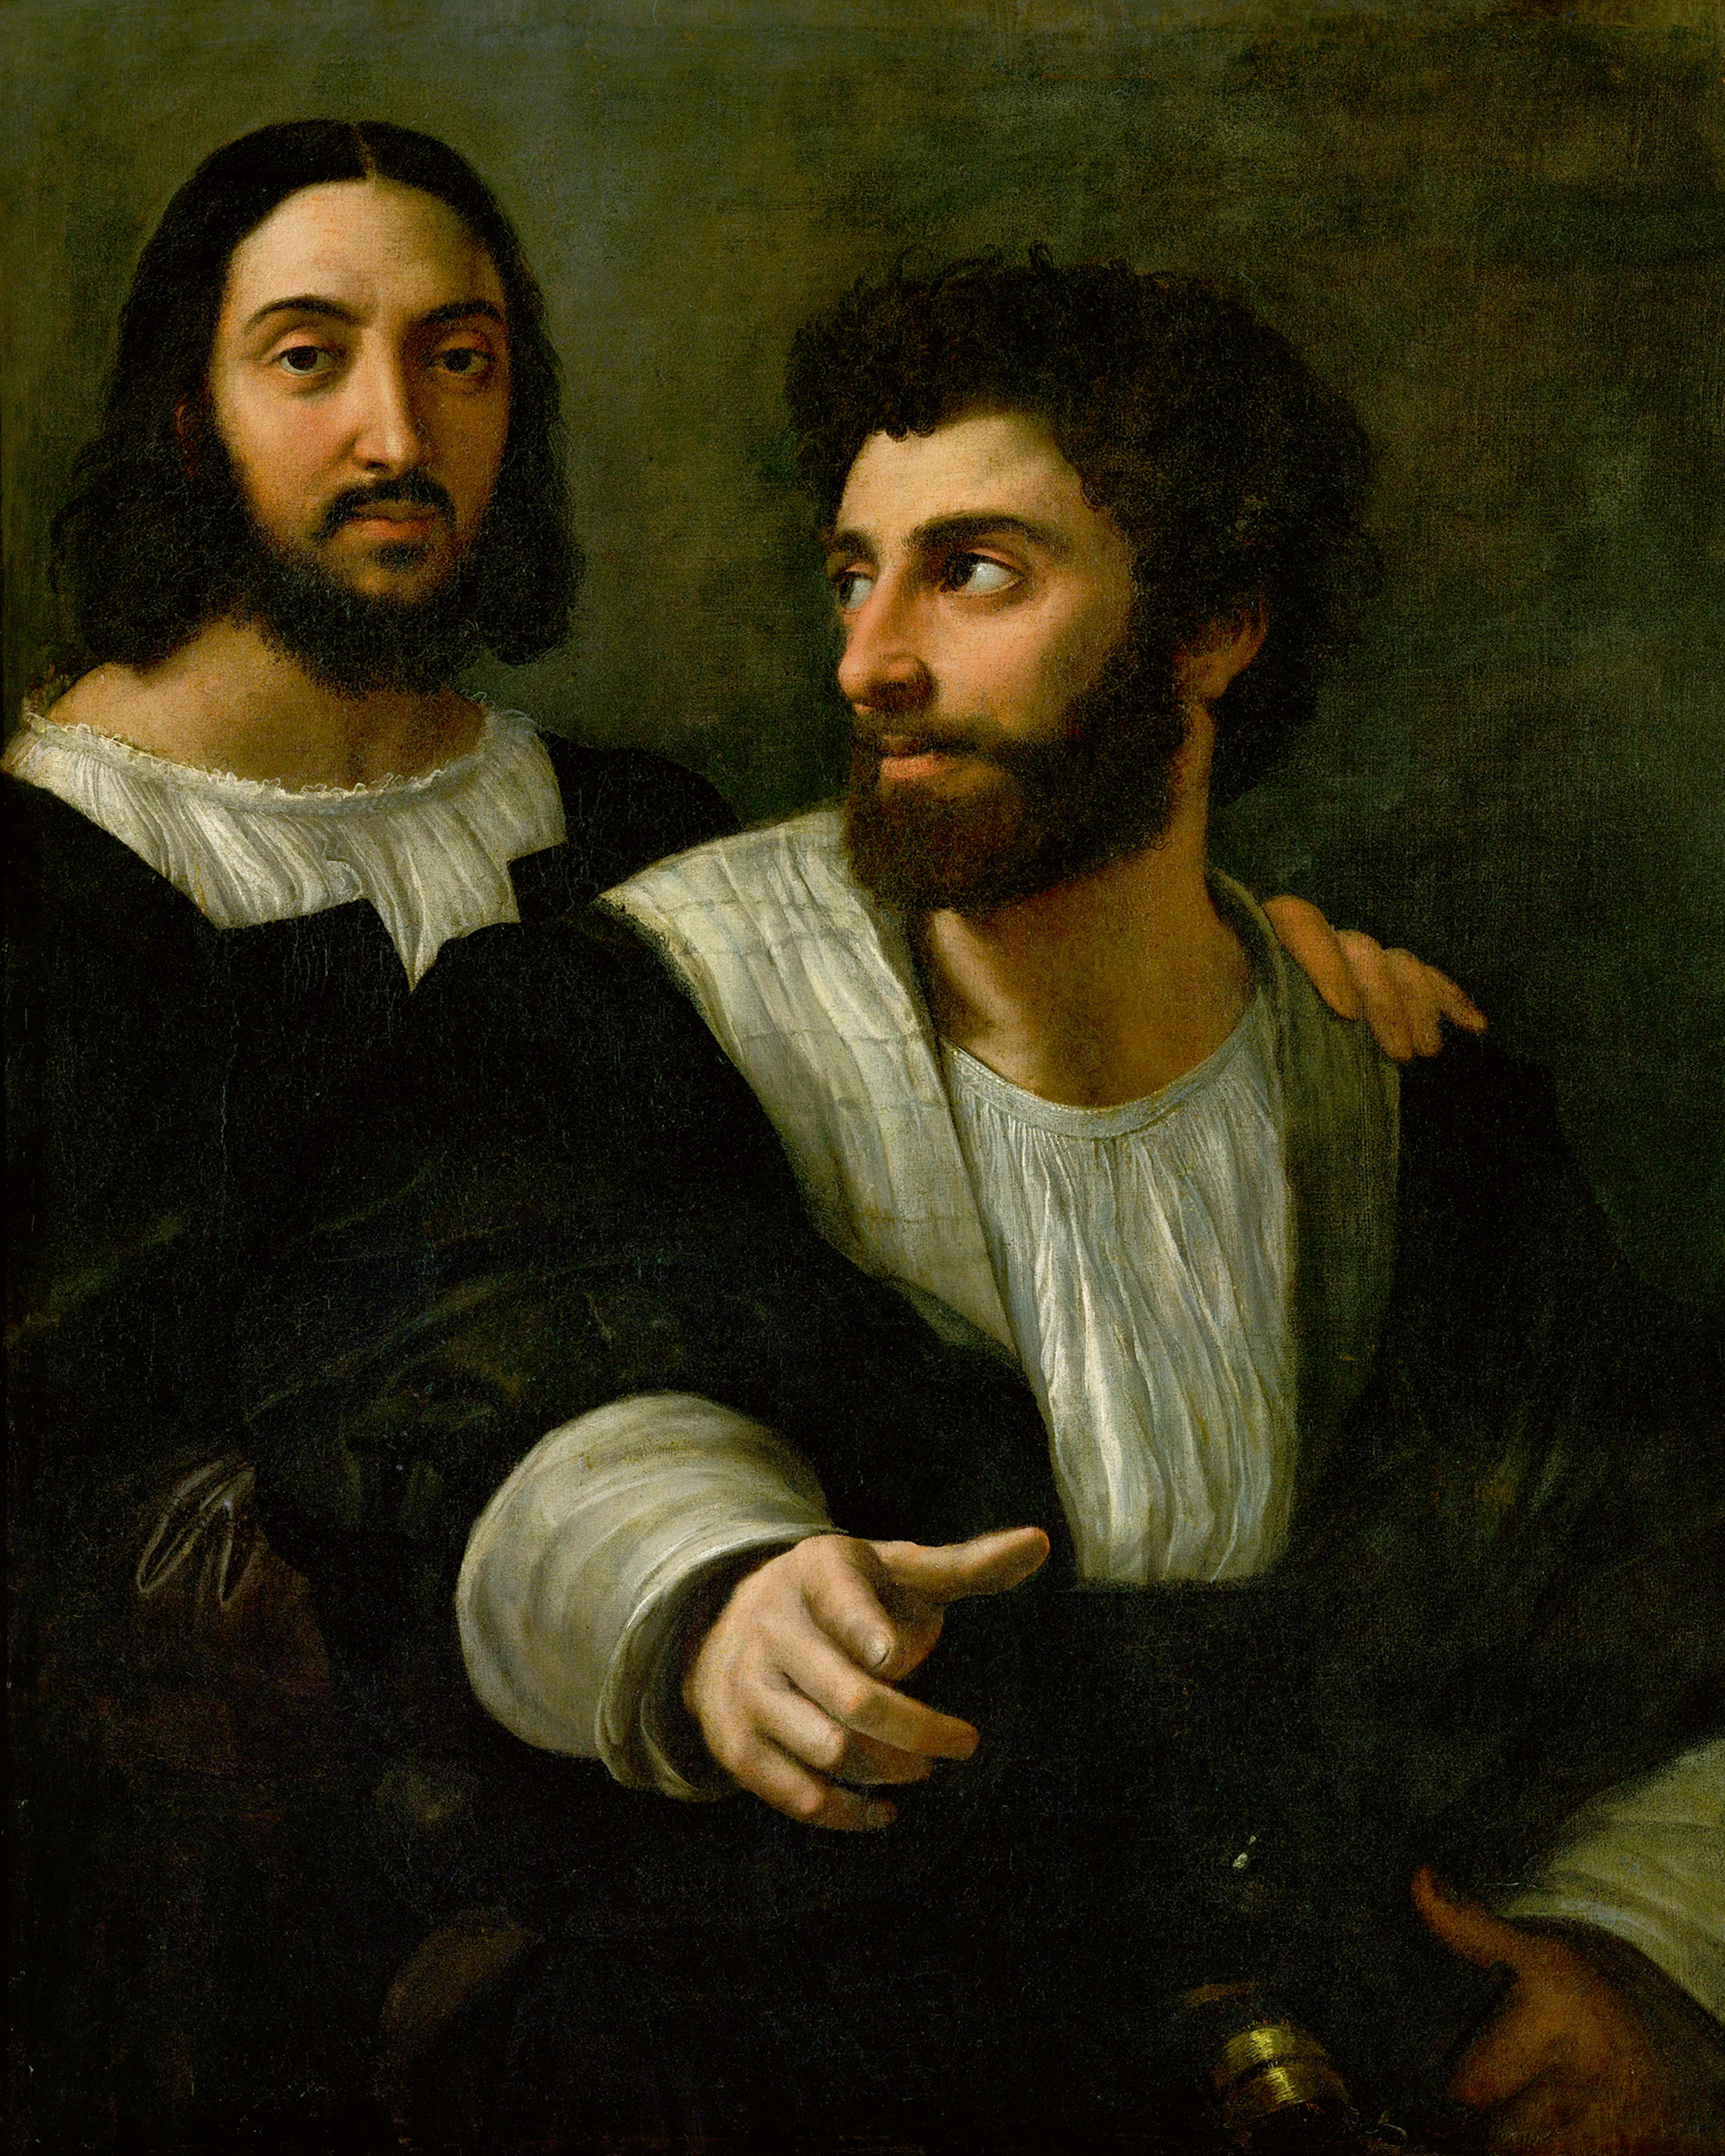 Raphael’s circa fifteen nineteen painting titled “Self-Portrait with a Friend.”